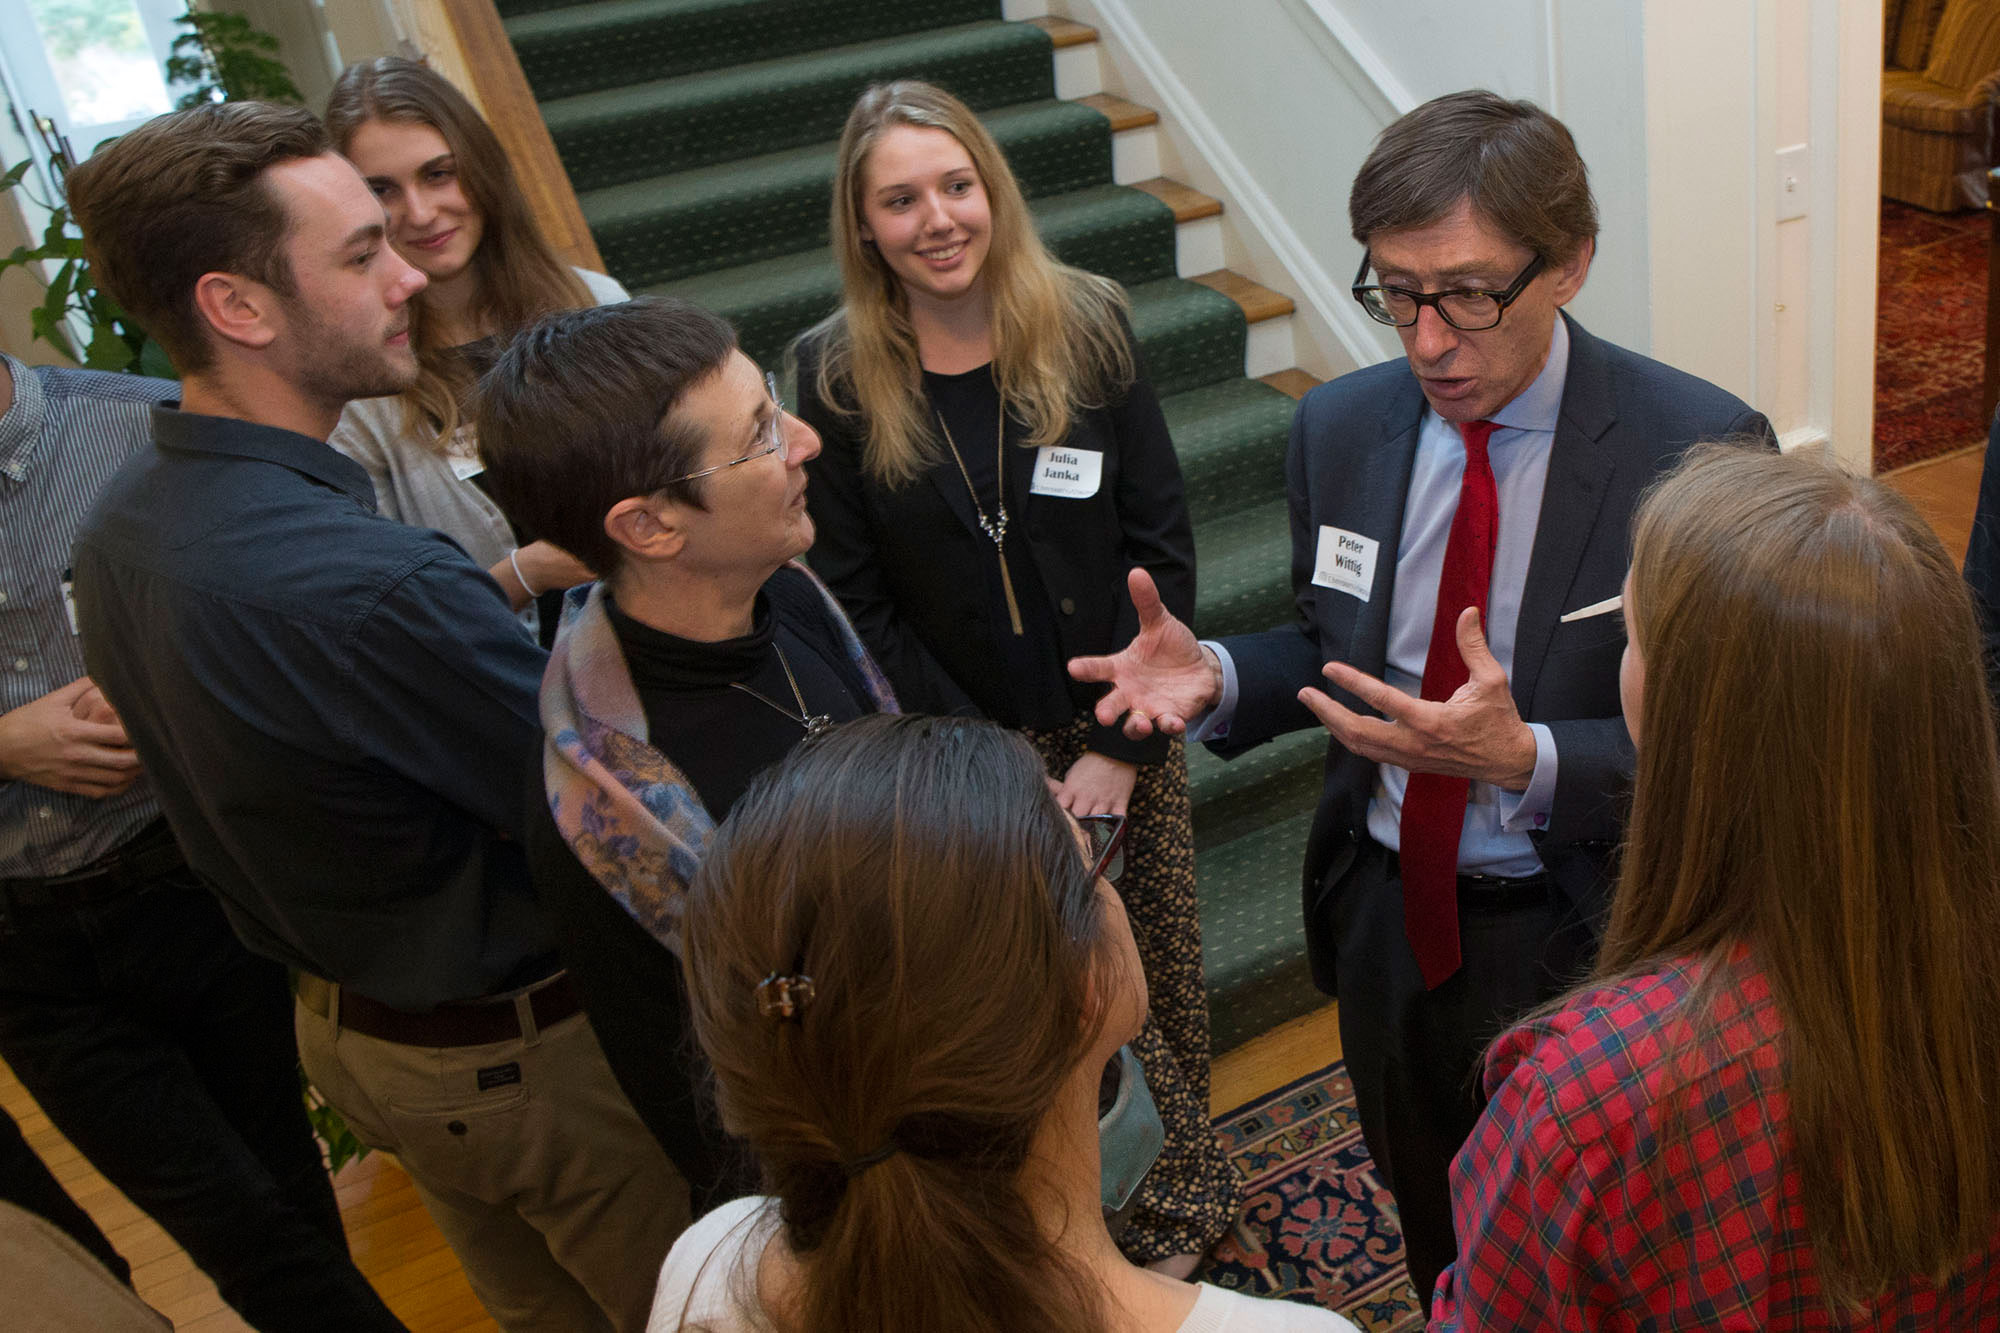 German Ambassador to the U.S. Peter Wittig talking with students in a hallway